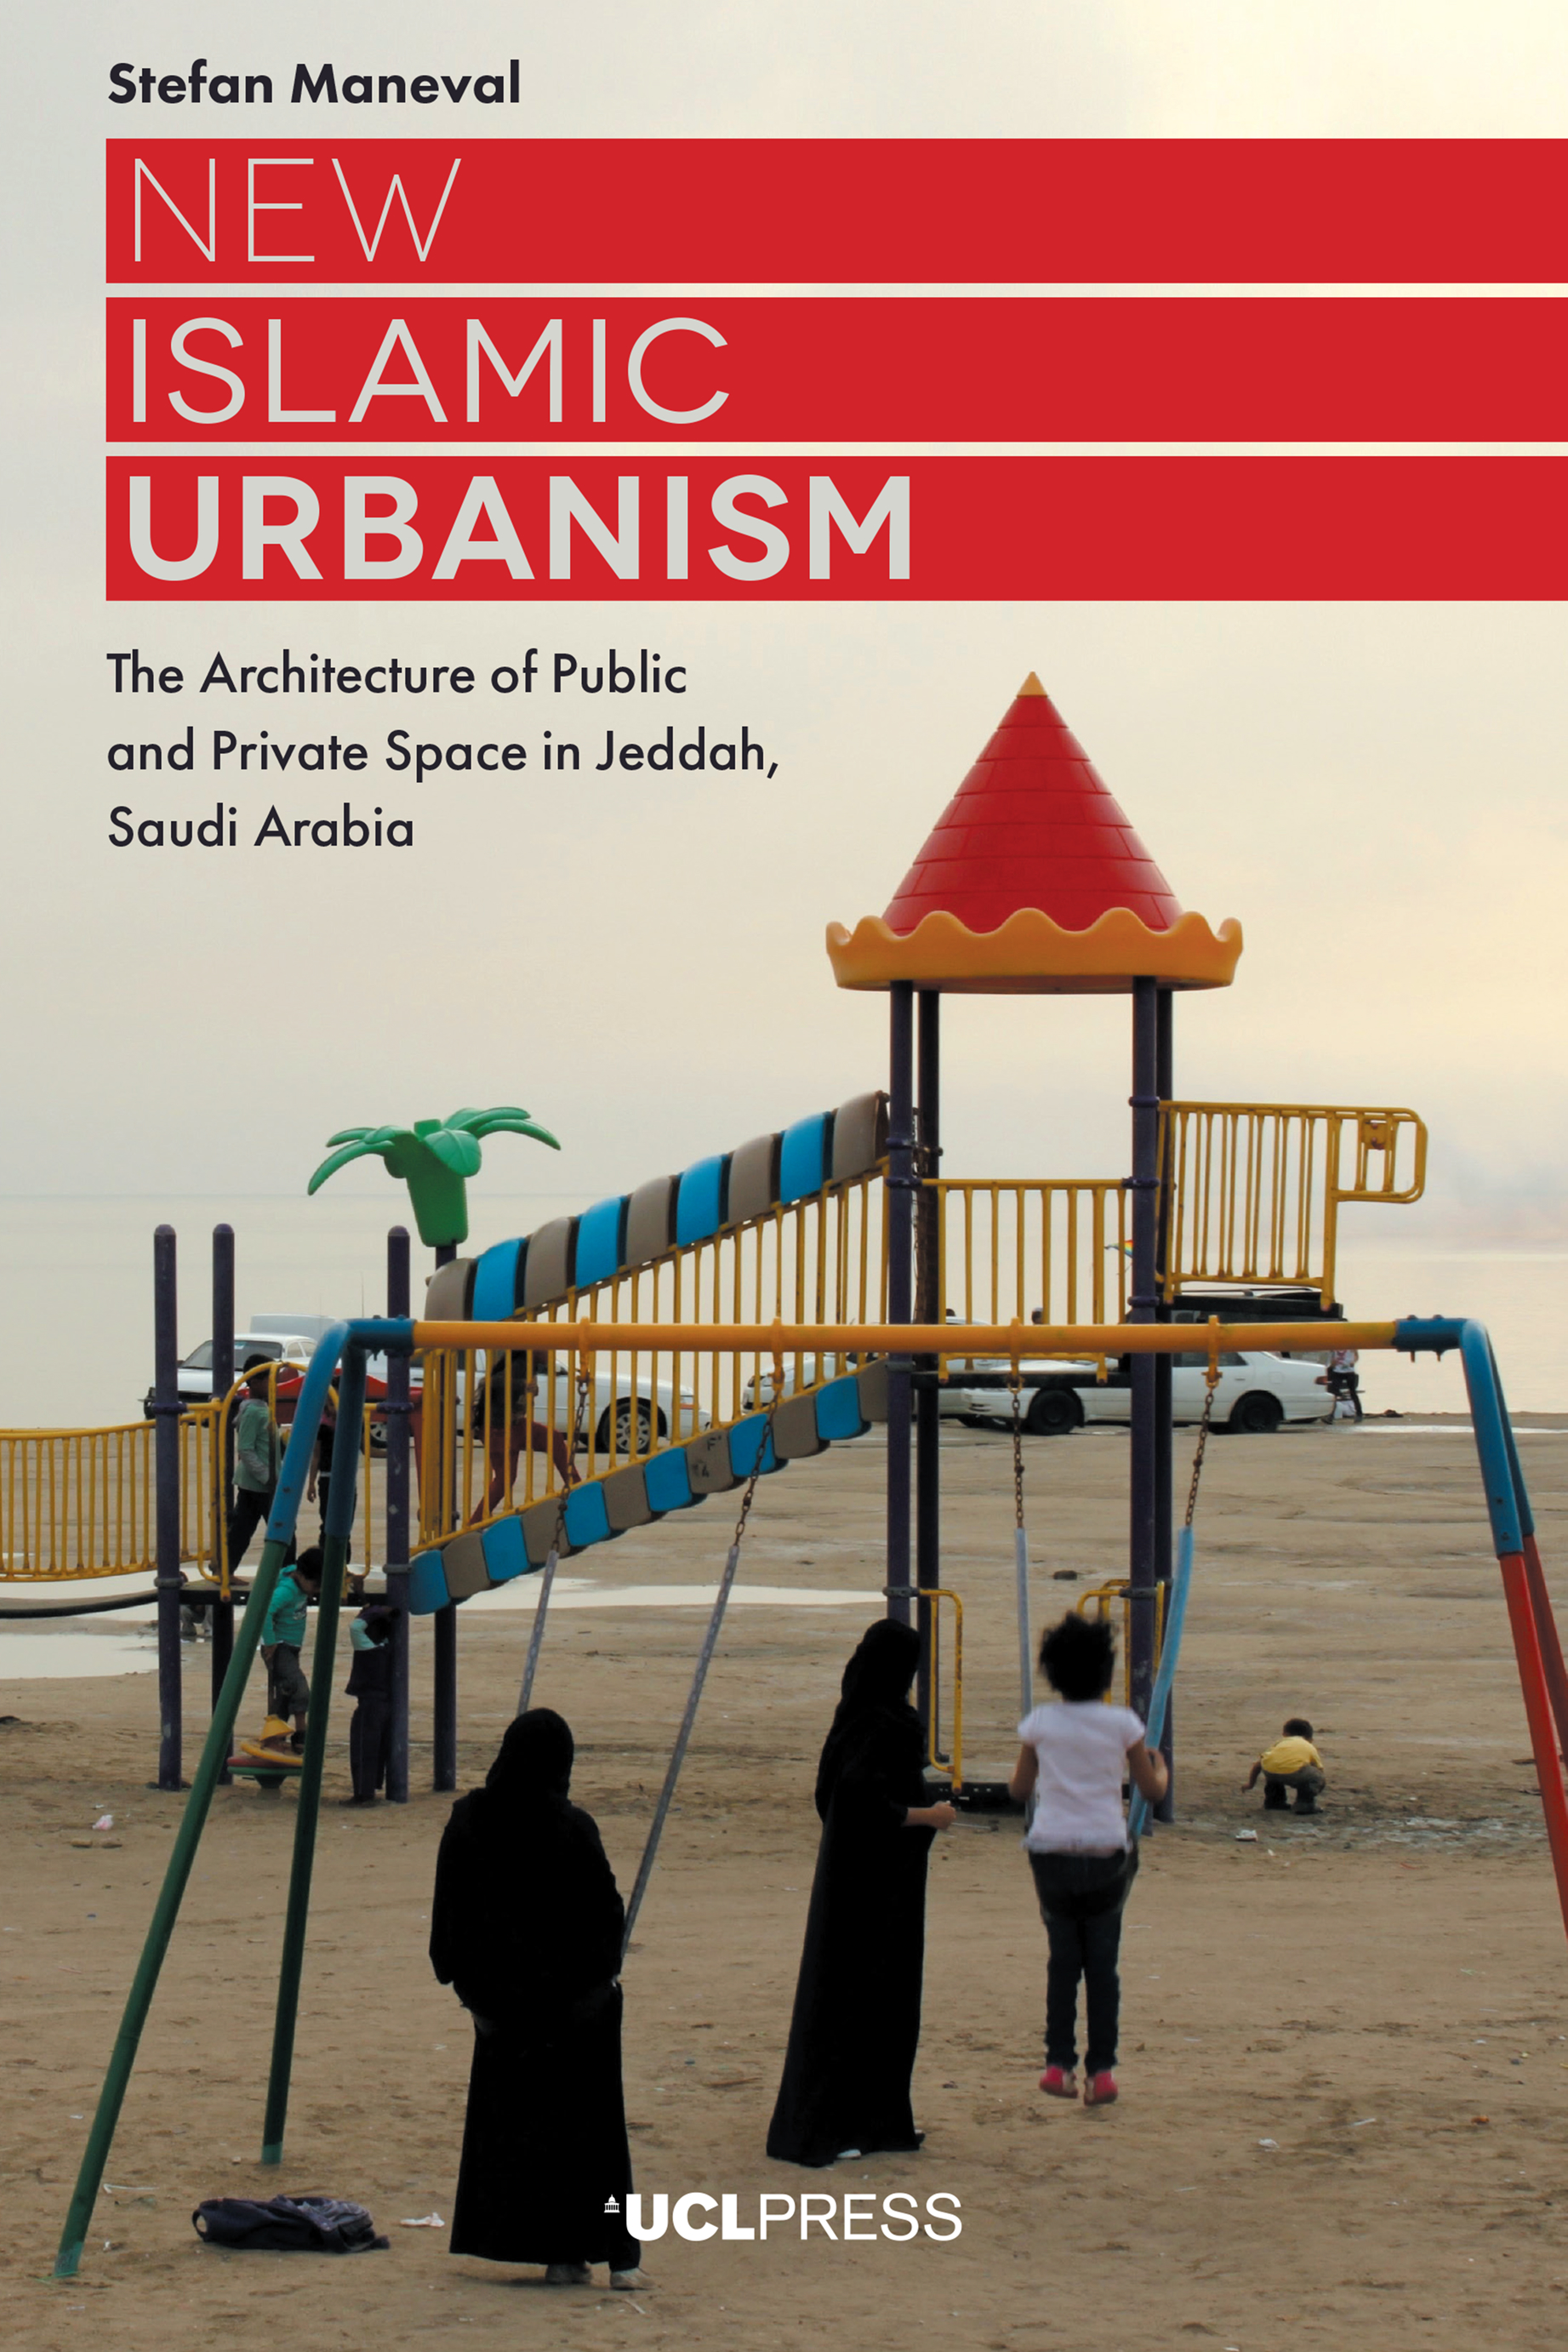 New Islamic Urbanism: The Architecture of Public and Private Space in Jeddah, Saudi Arabia